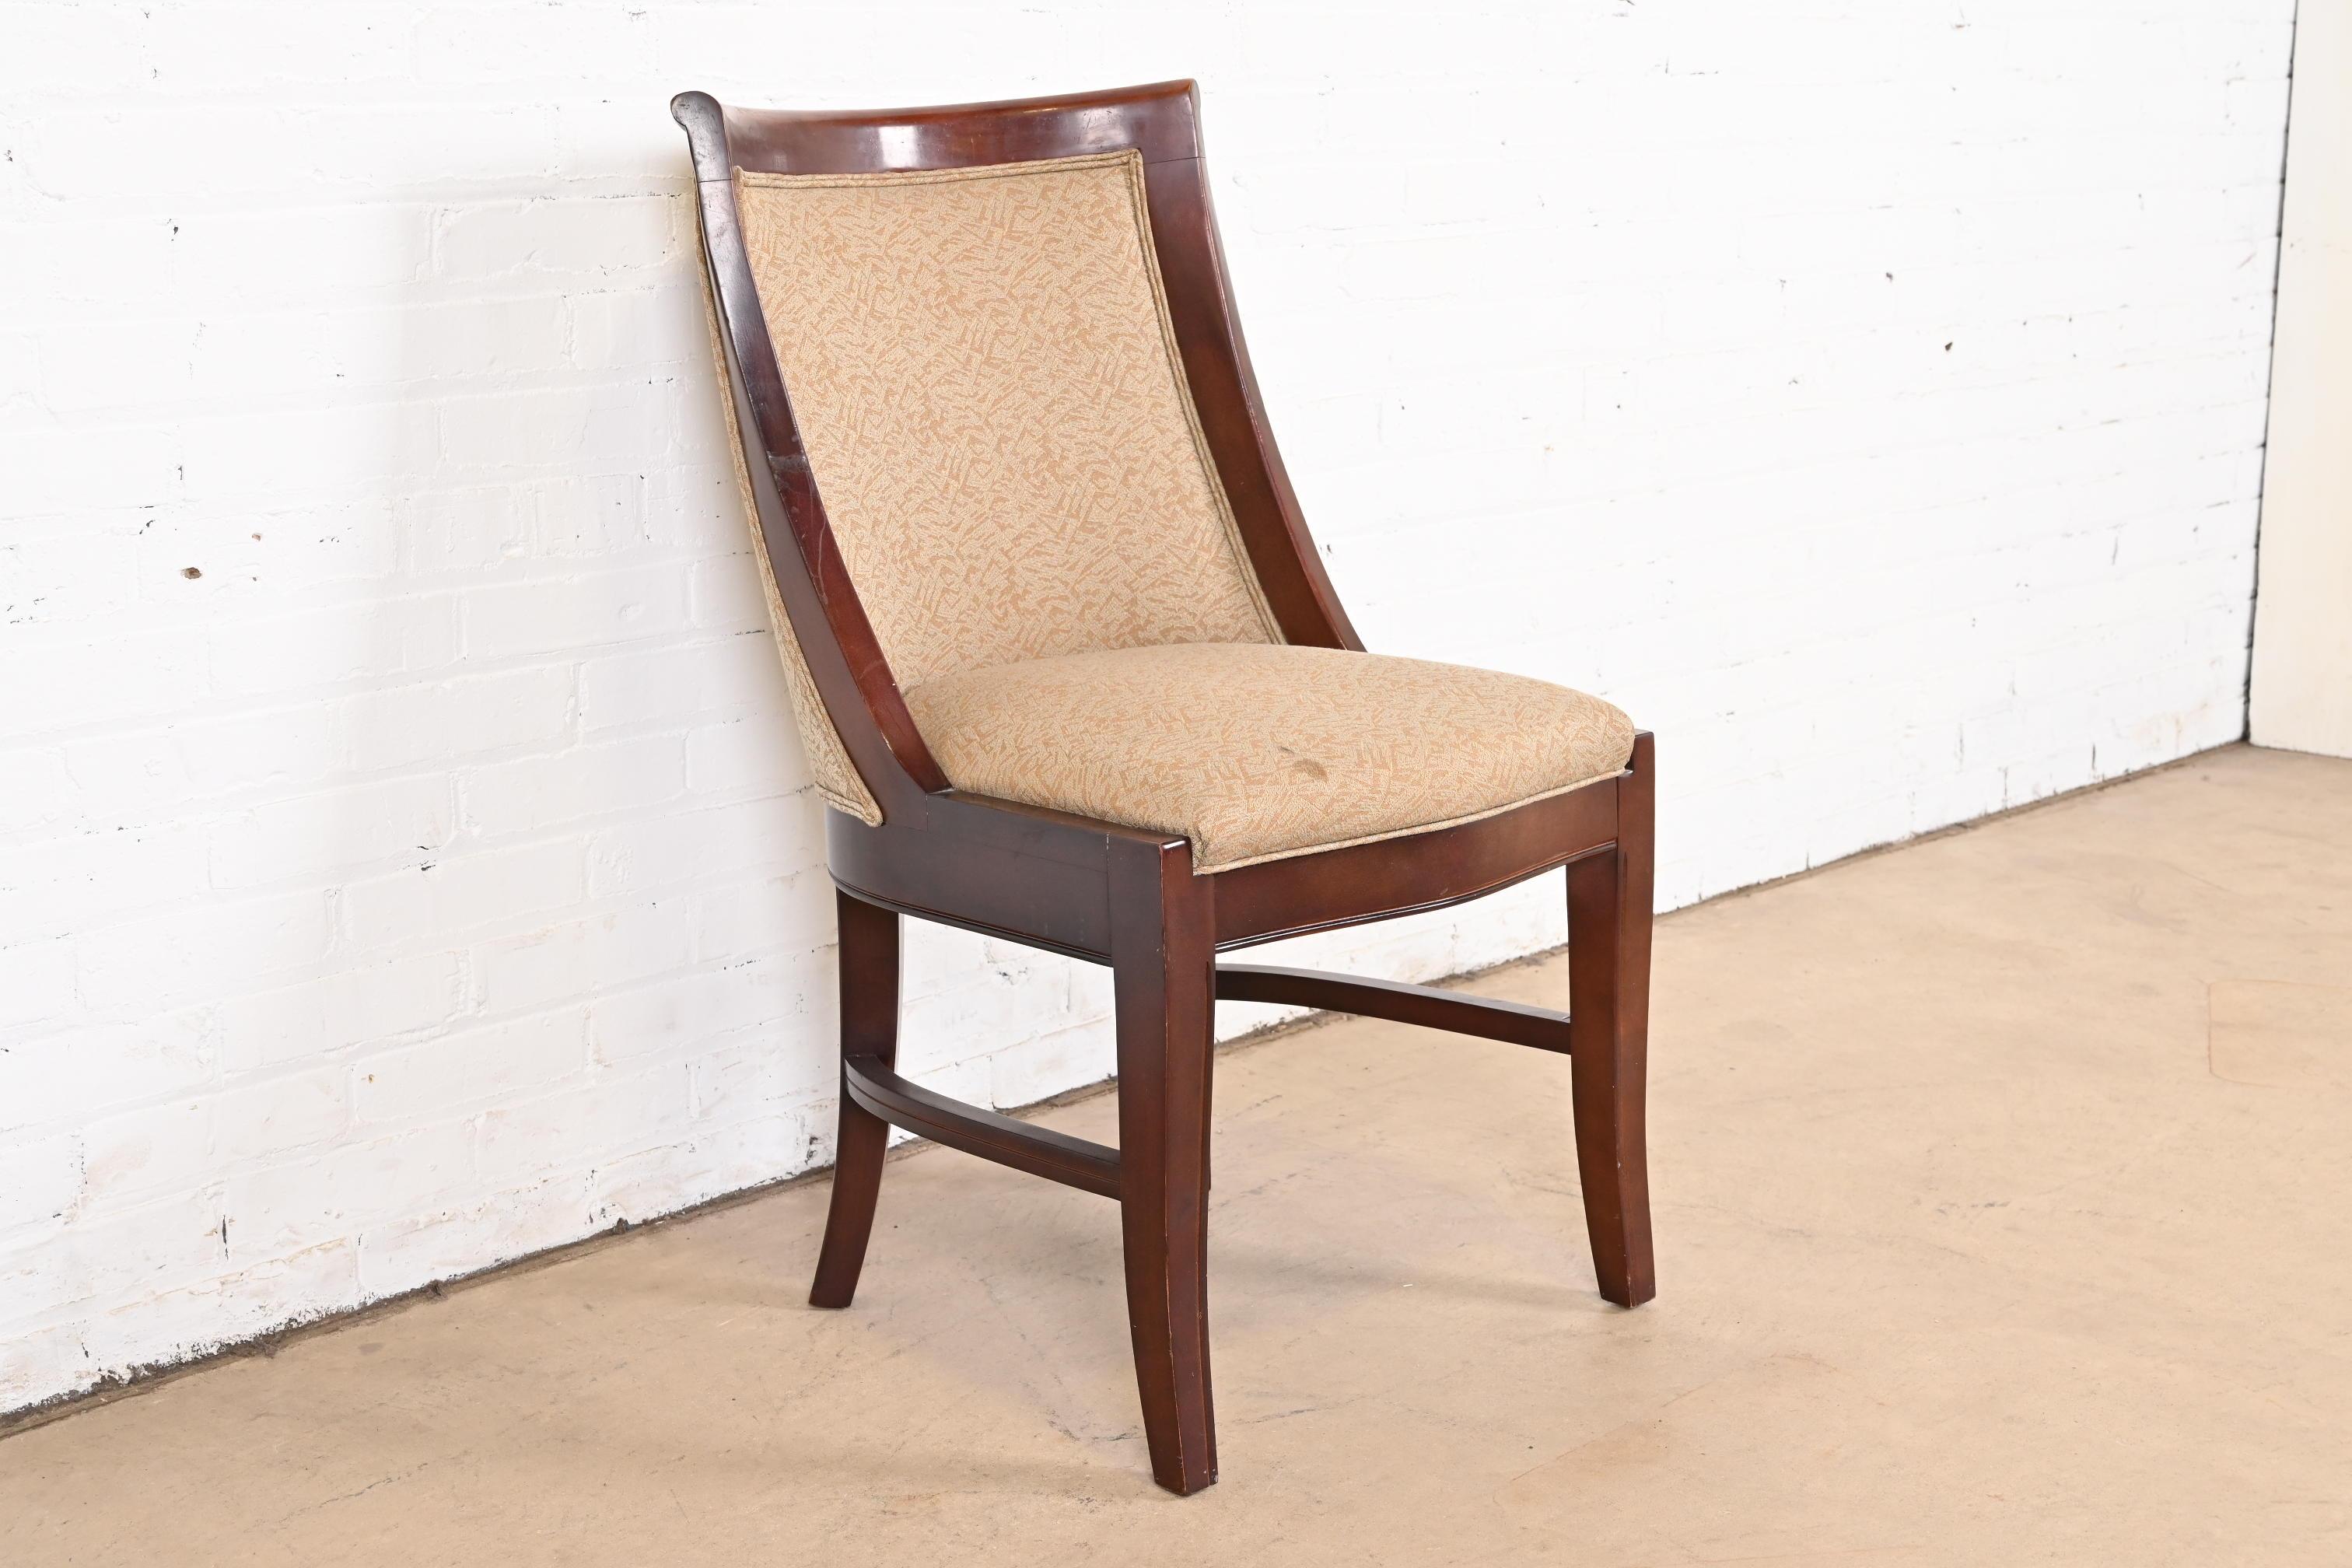 Barbara Barry for Baker Furniture Attributed Modern Art Deco Mahogany Side Chair 1